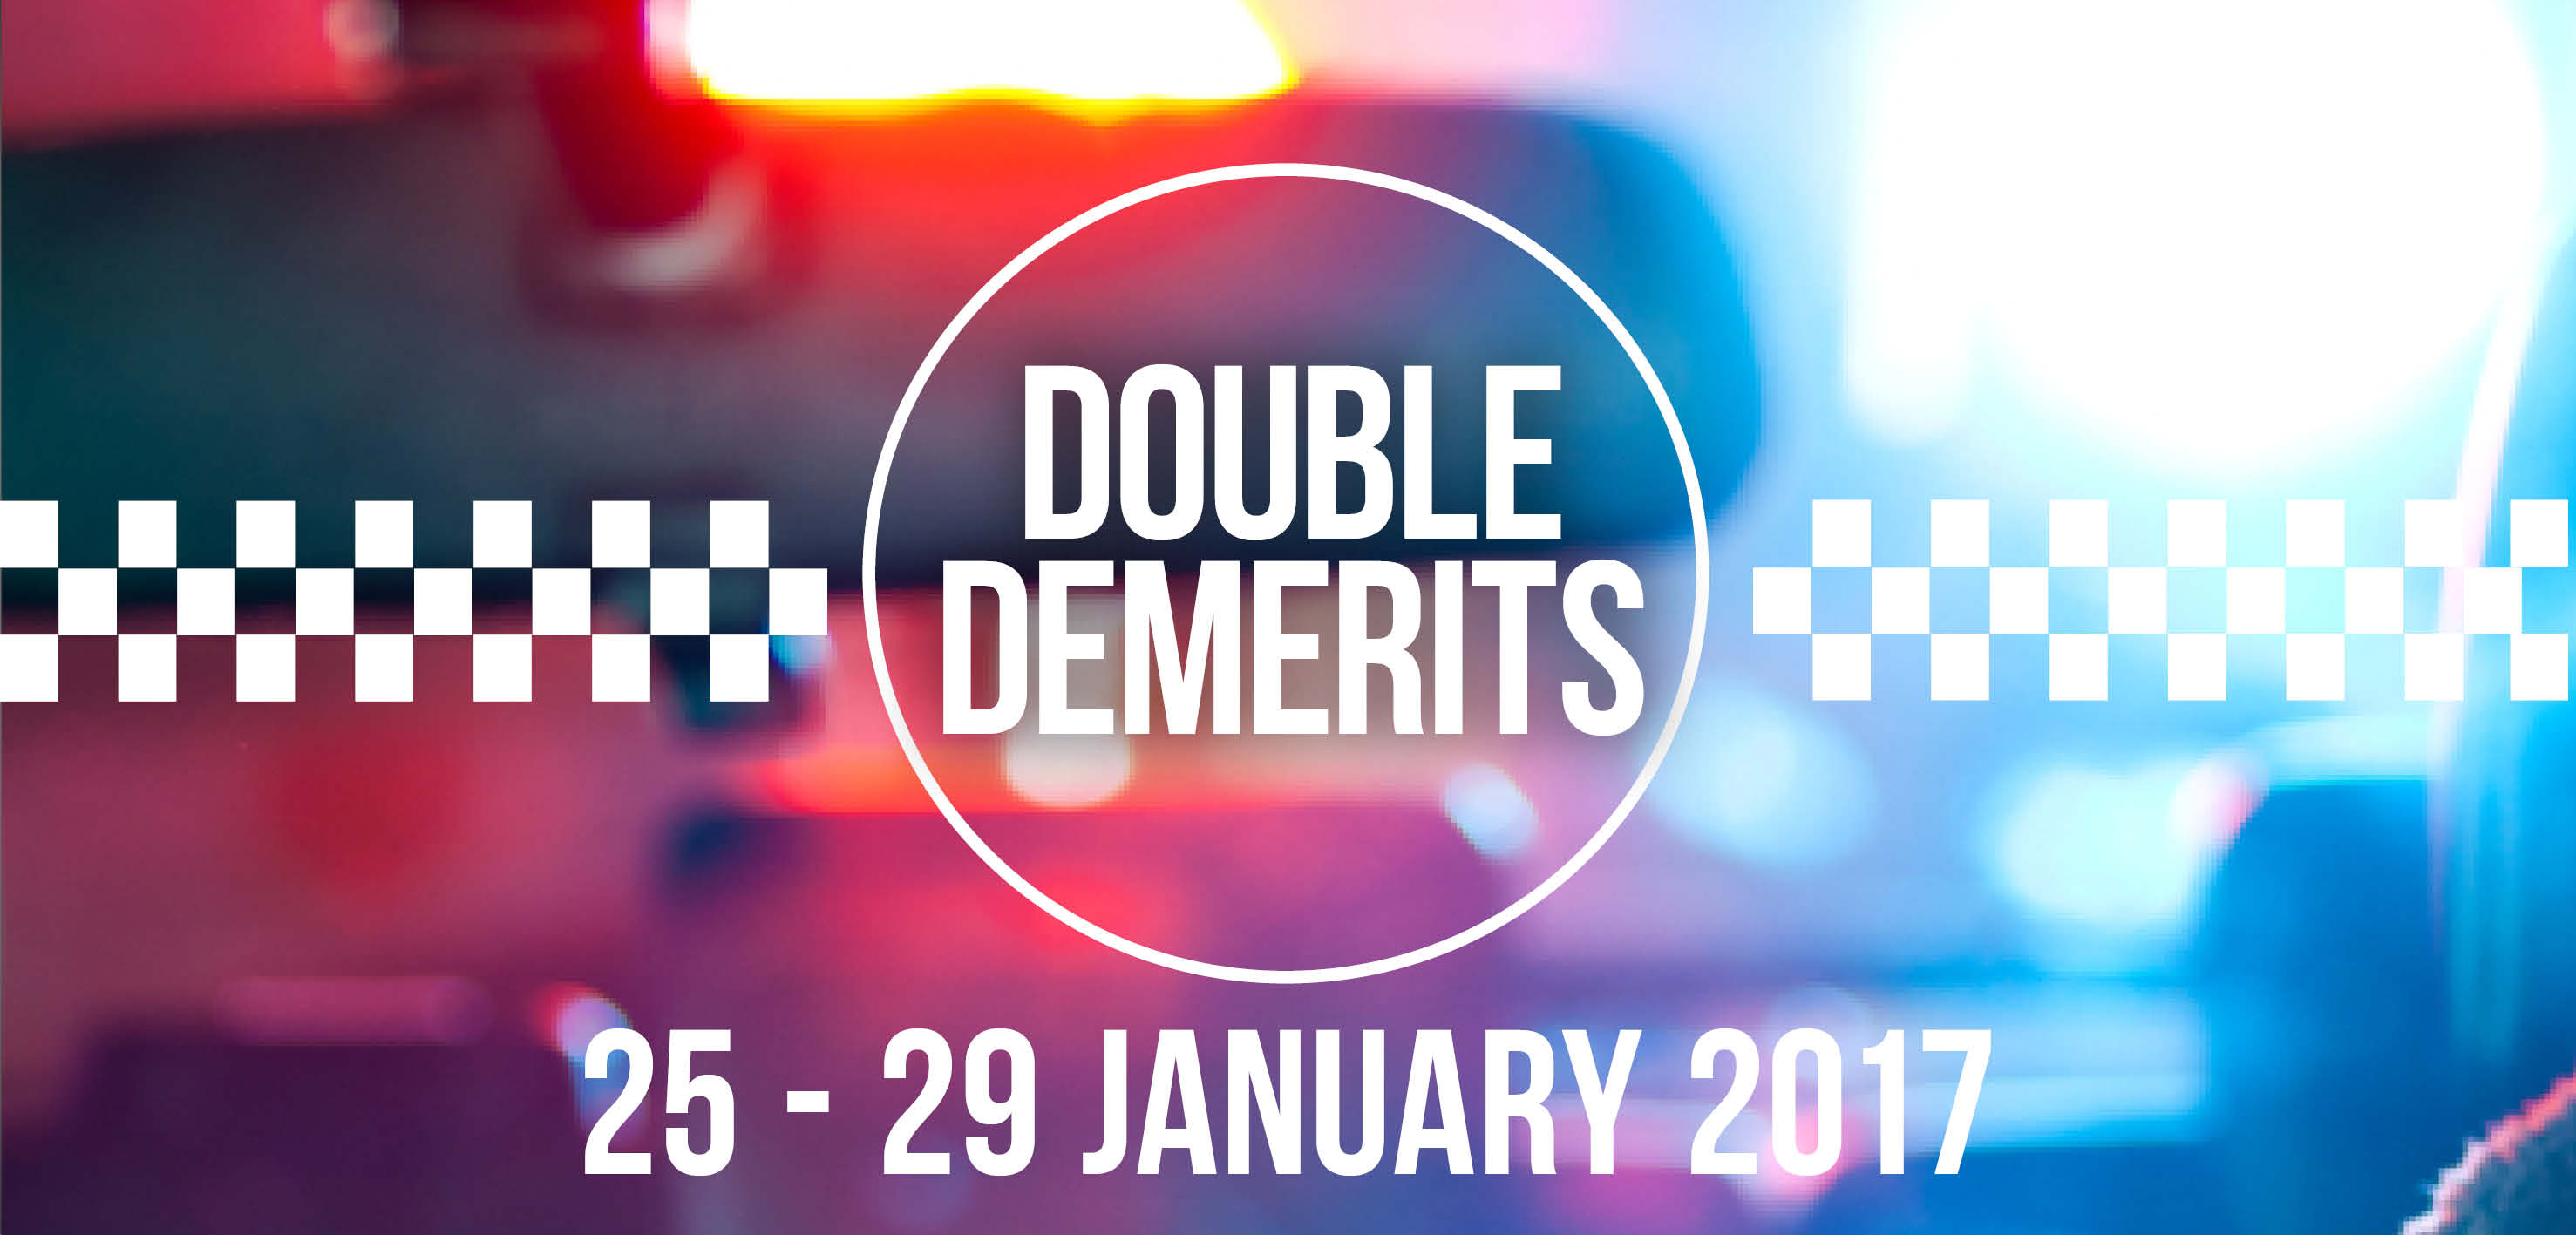 Double demerits for Australia Day